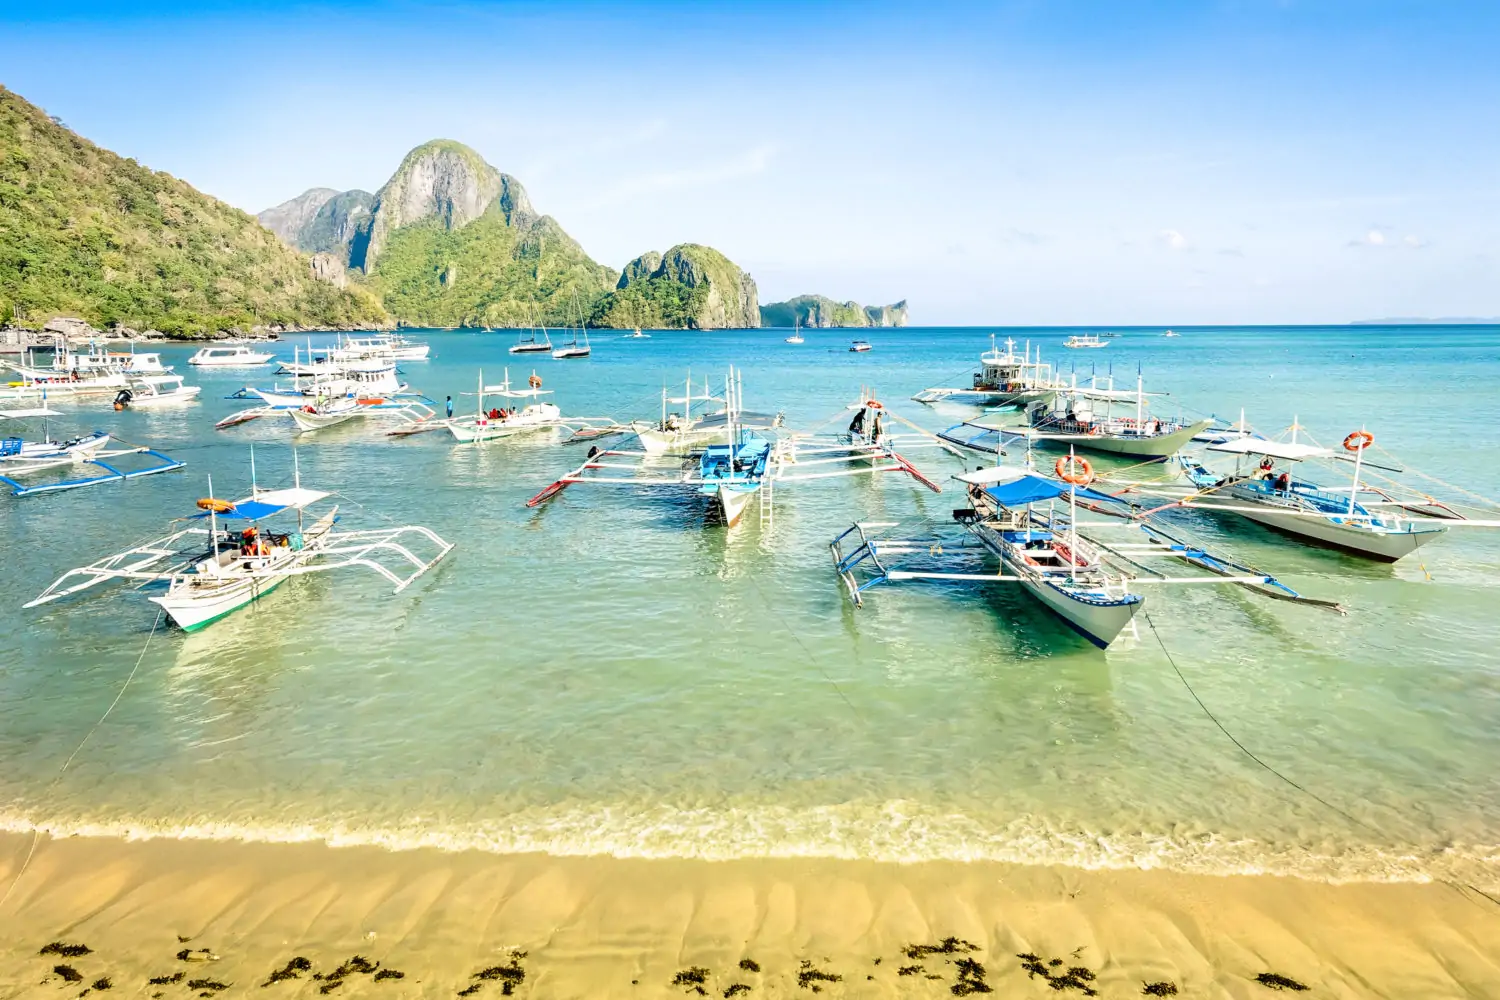  Palawan Front beach with longtail boats in El Nido